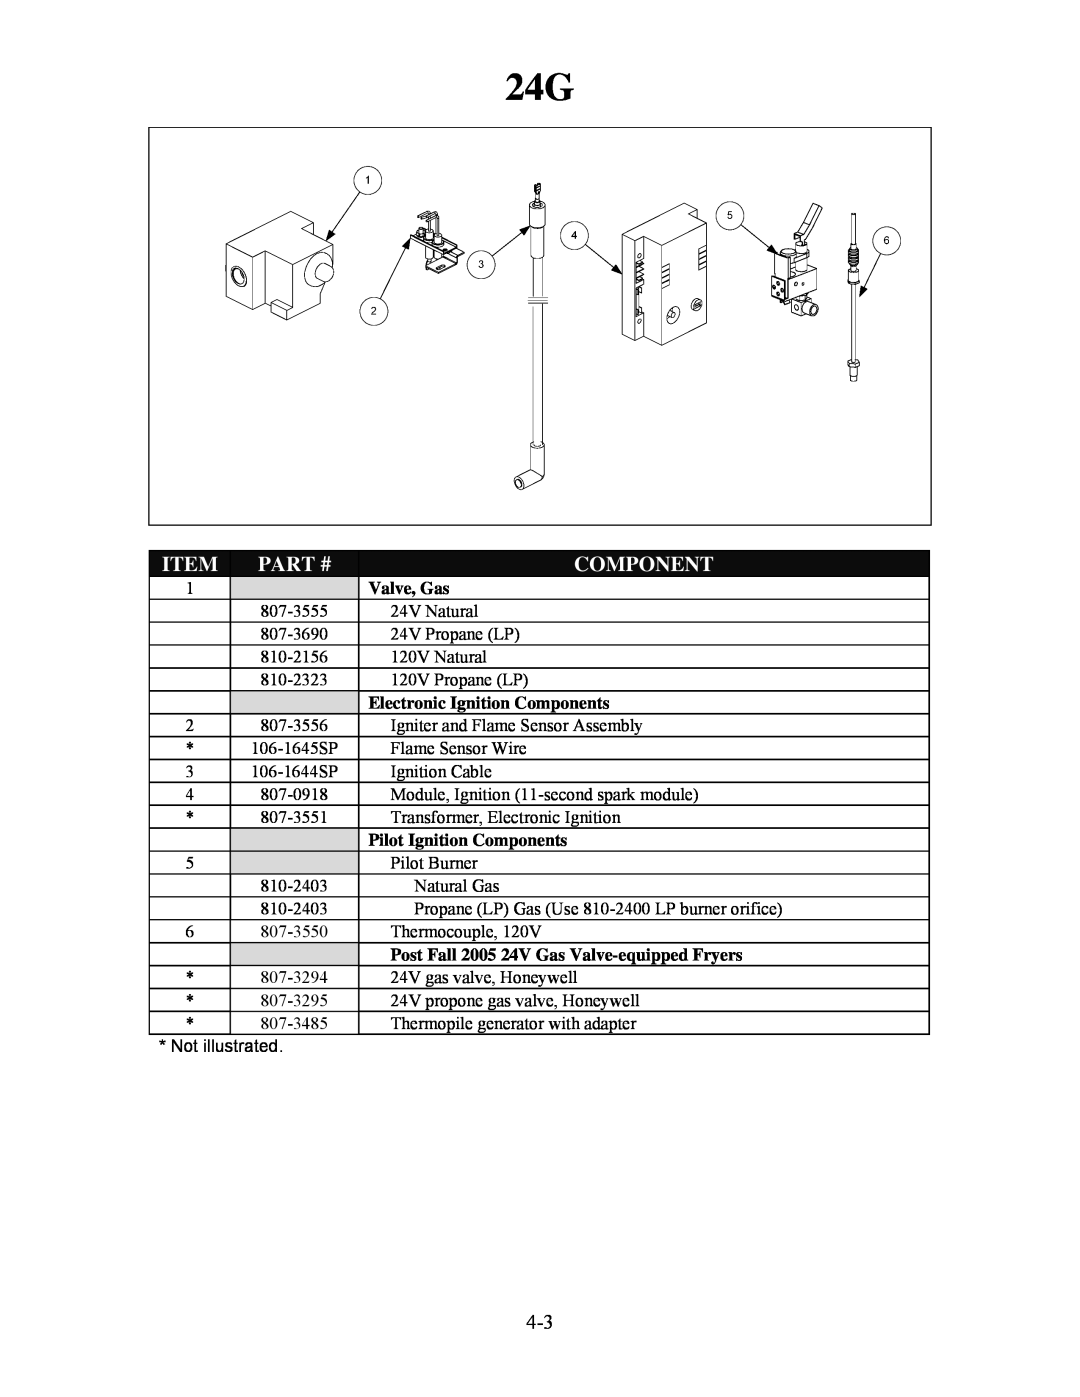 Frymaster H50 manual Part #, Valve, Gas, Electronic Ignition Components, Pilot Ignition Components 